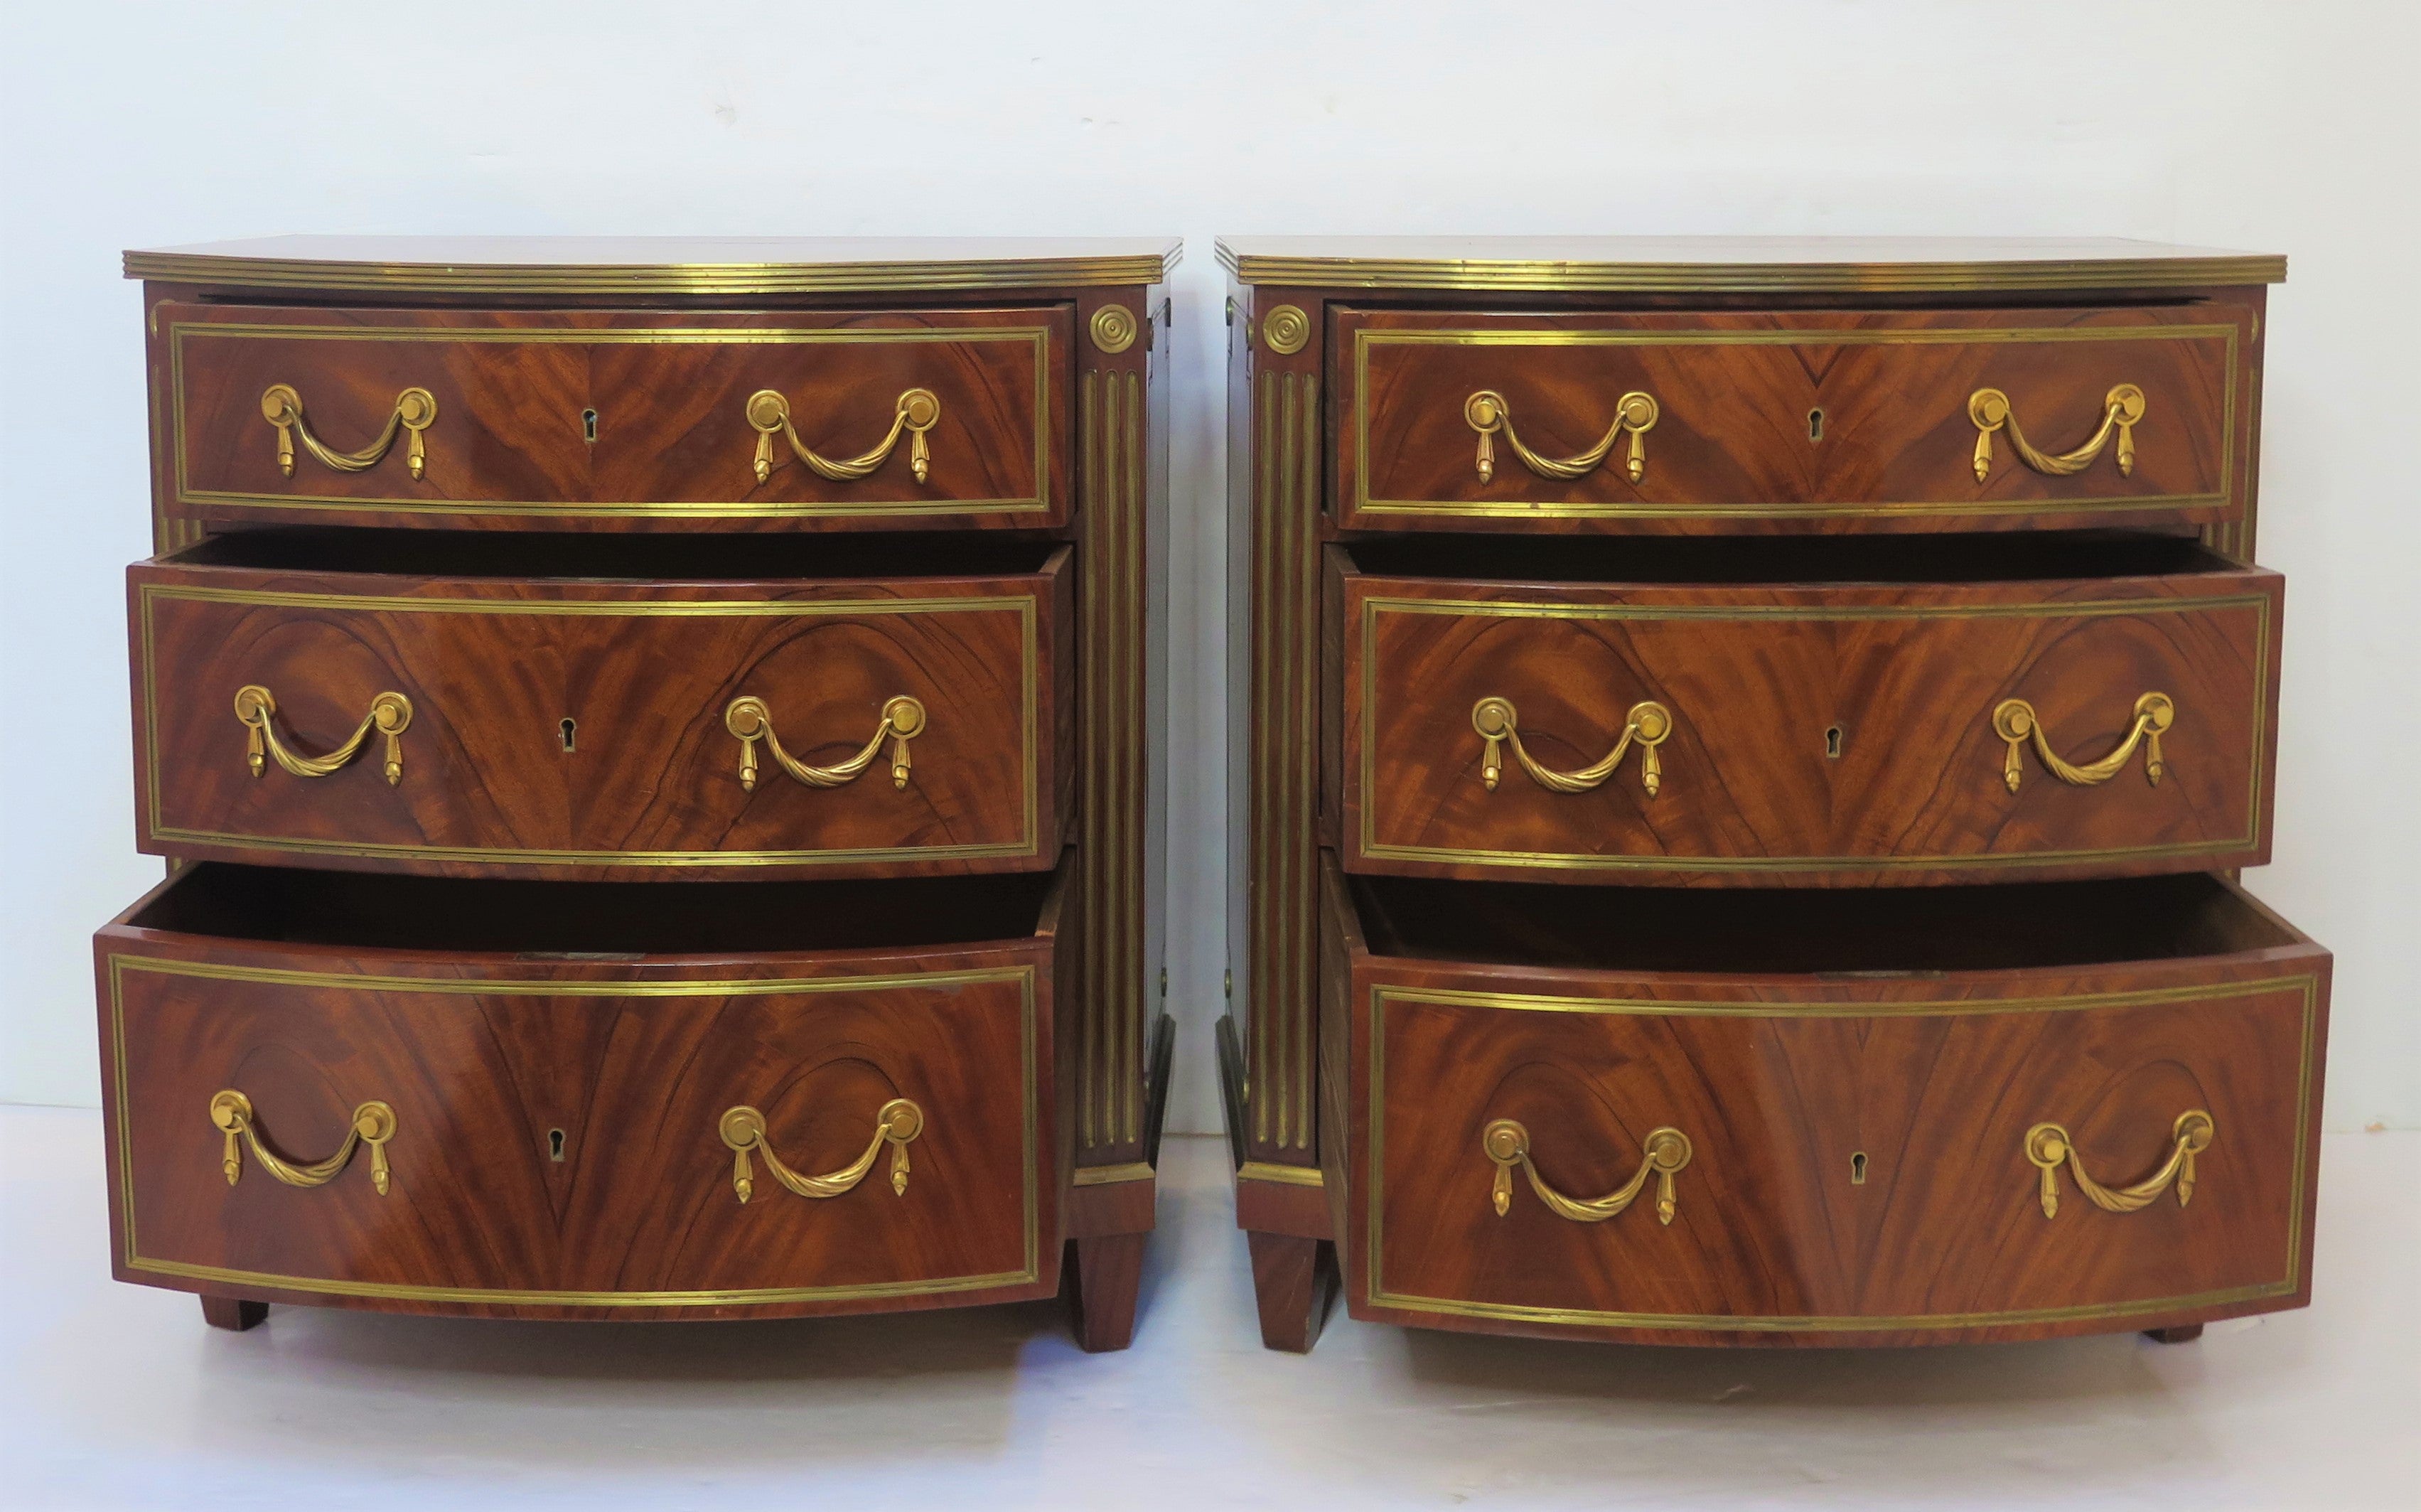 A Pair of Russian Neoclassical Chests of Drawers